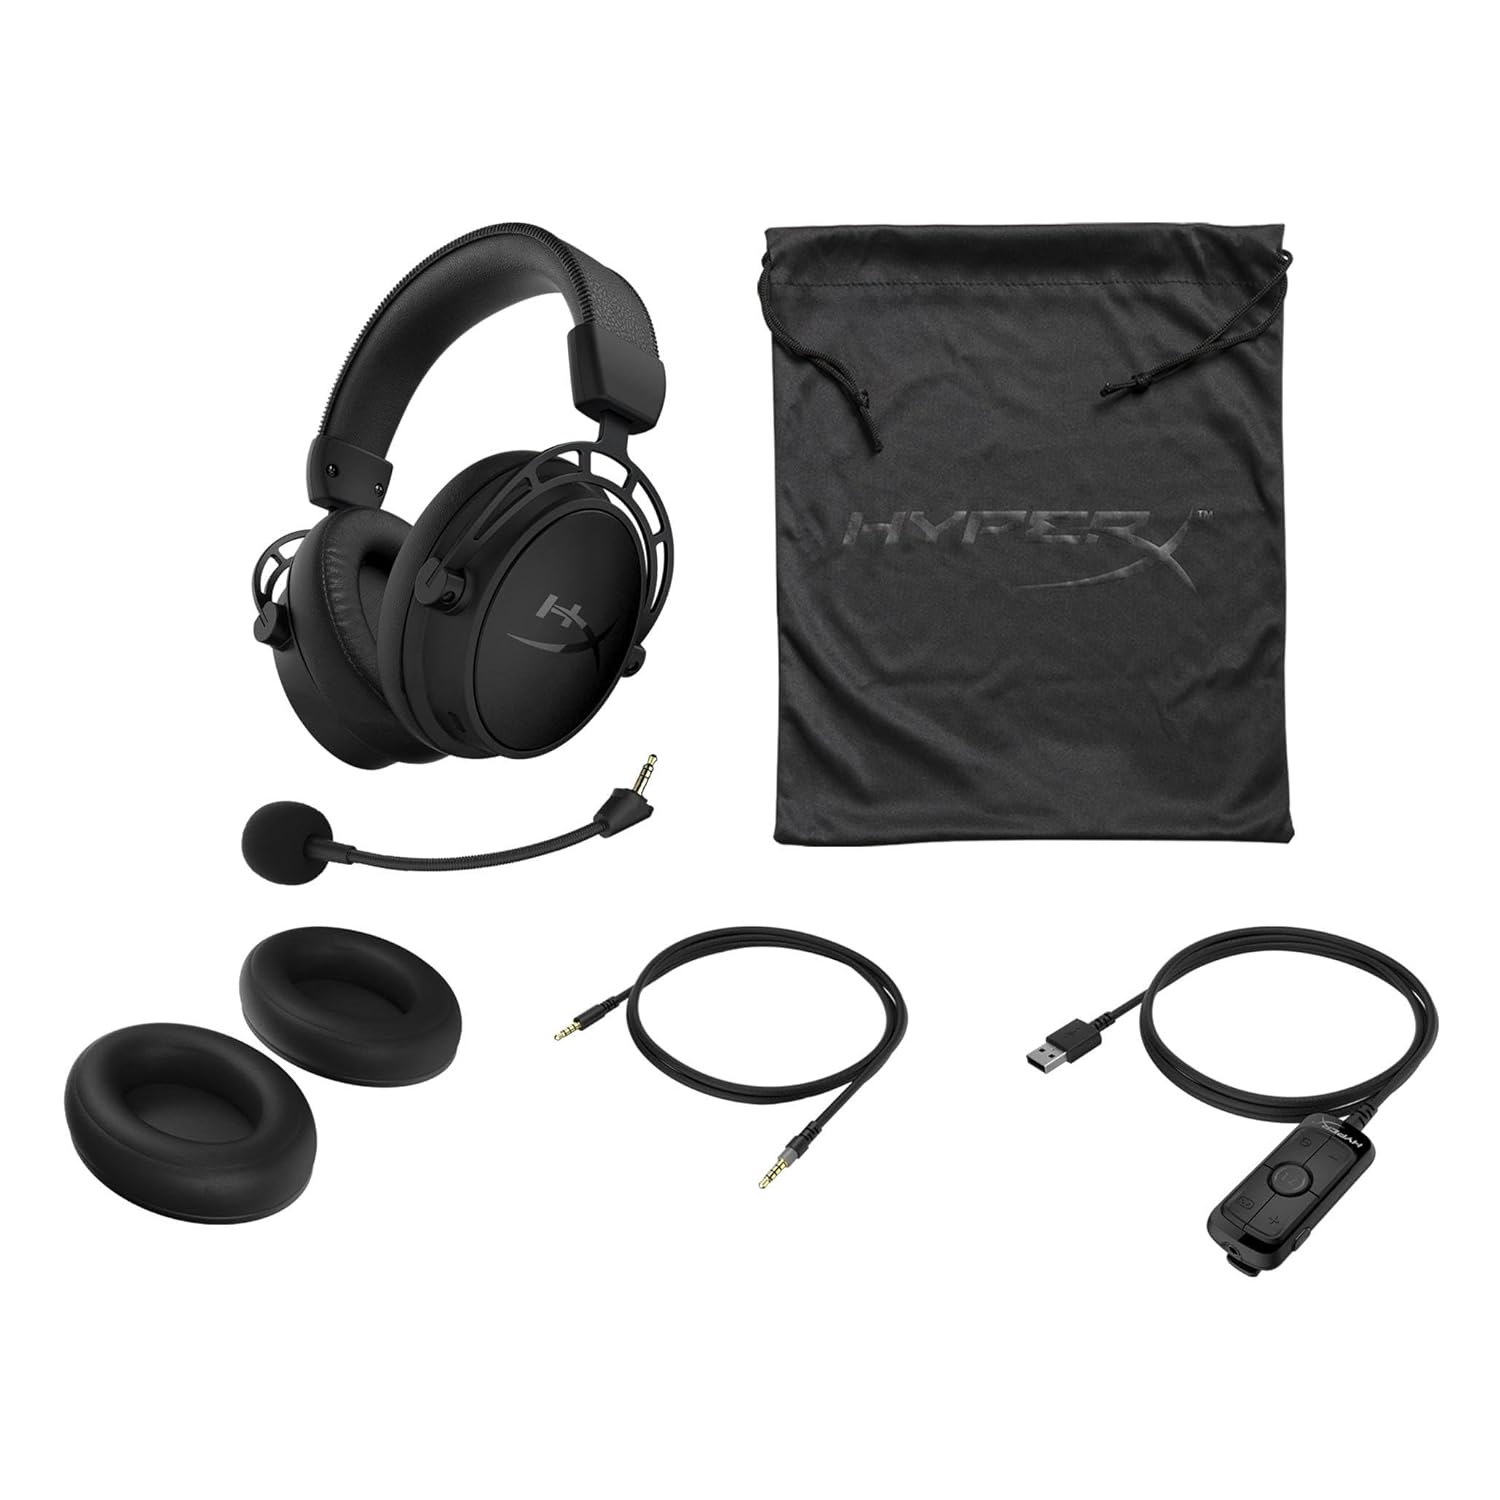 (Open Box) Hyper x Cloud Alpha Black Pro Gaming Wired On Ear Headphones with Mic for Pc, Ps4 & Xbox One, Nintendo Switch (Grade - A+)